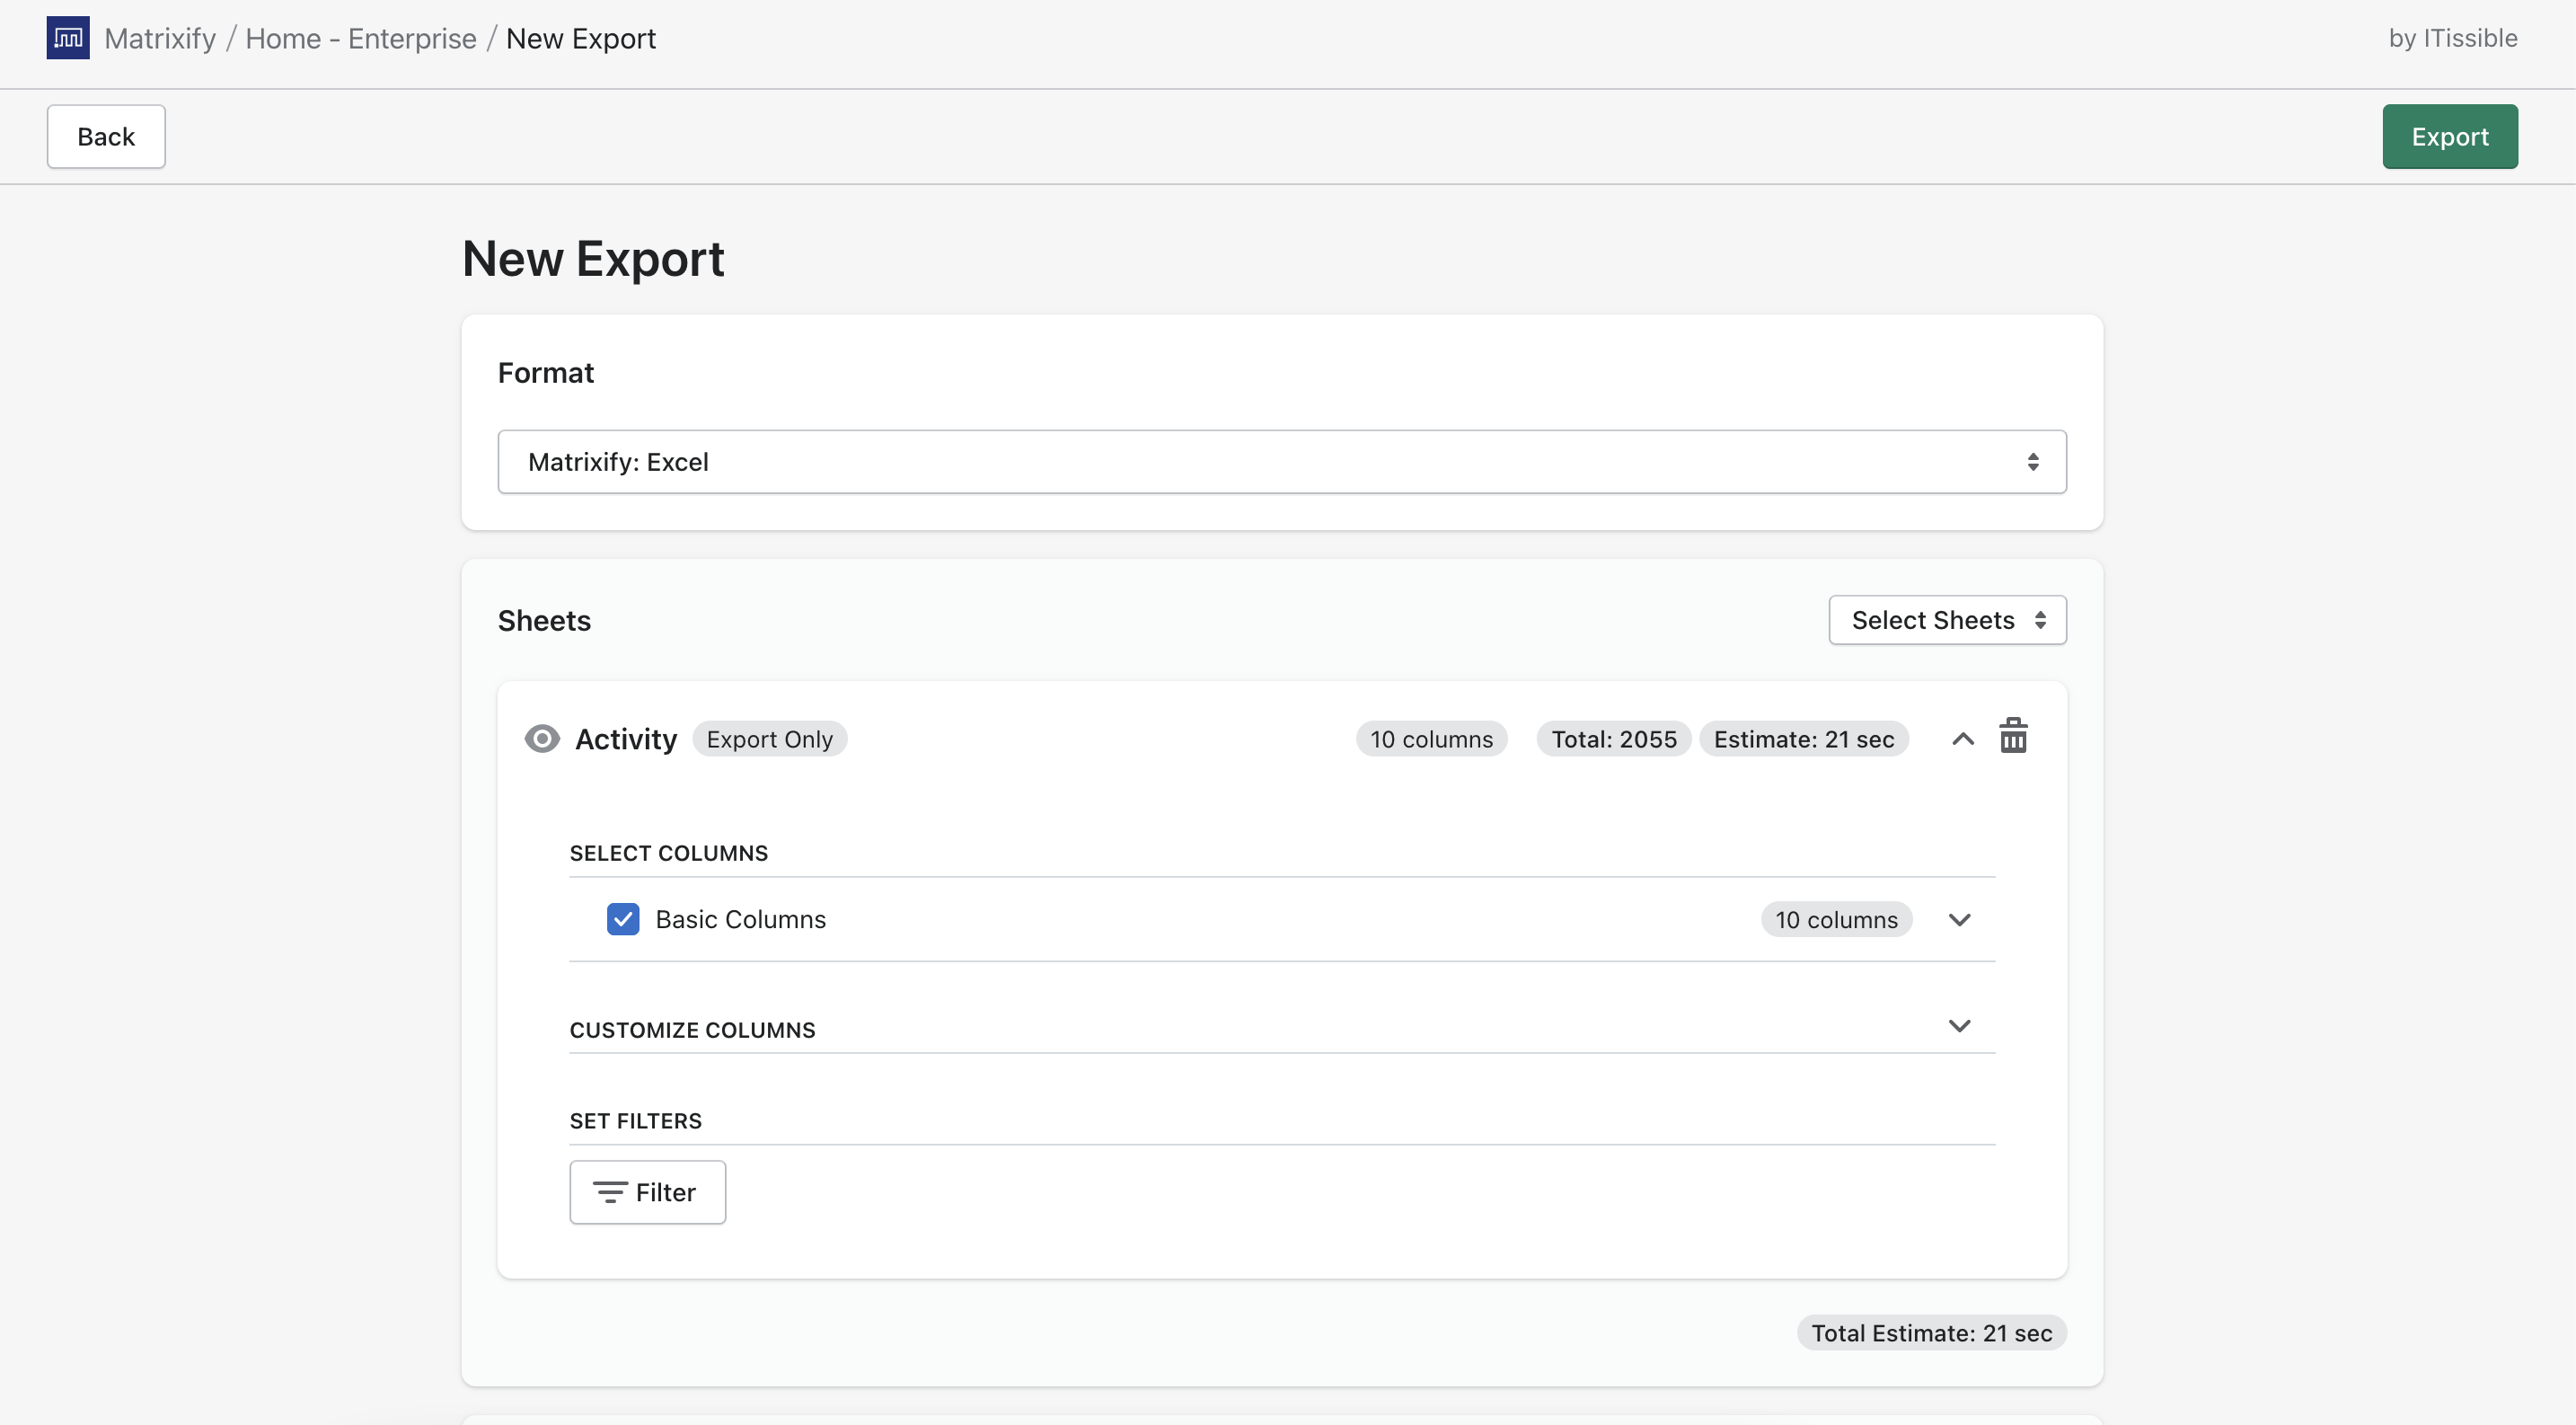 Activity checkbox selected to Export